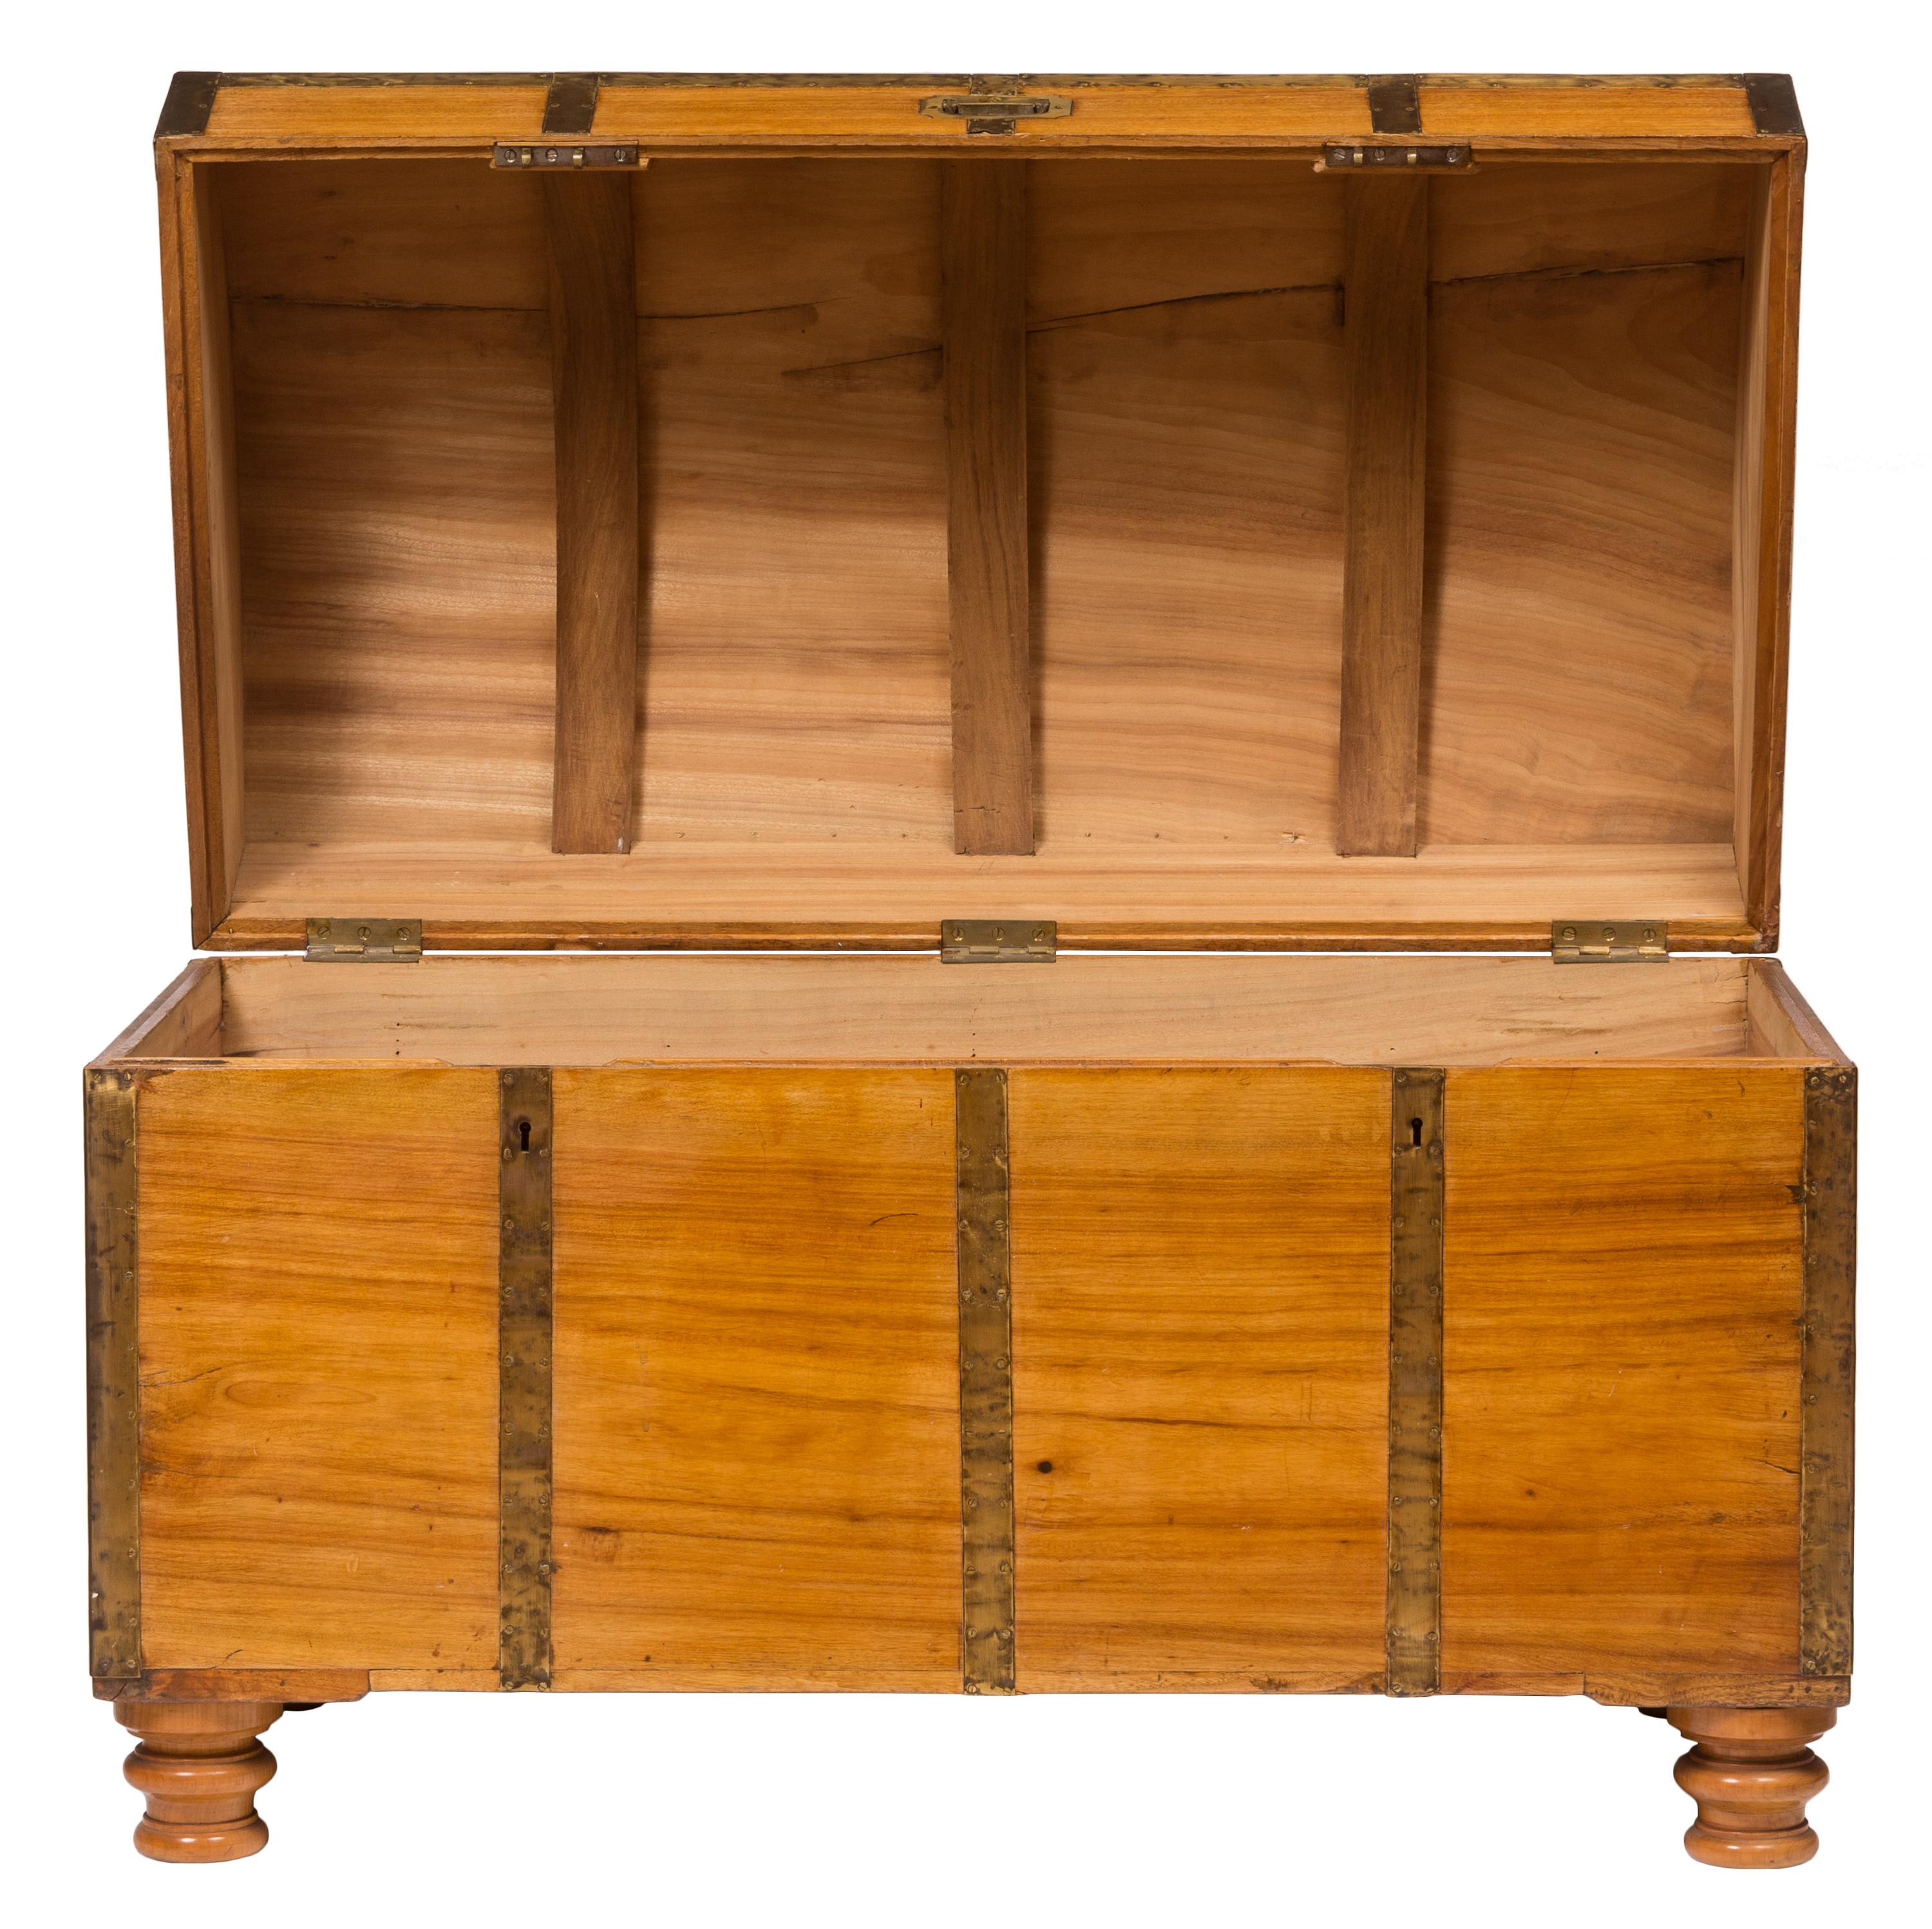 A late 19th century arched top camphor wood British military campaign chest, with original brass hardware. Built of durable materials and designed for travel, these rugged wooden chests were originally developed to carry the belongings of military